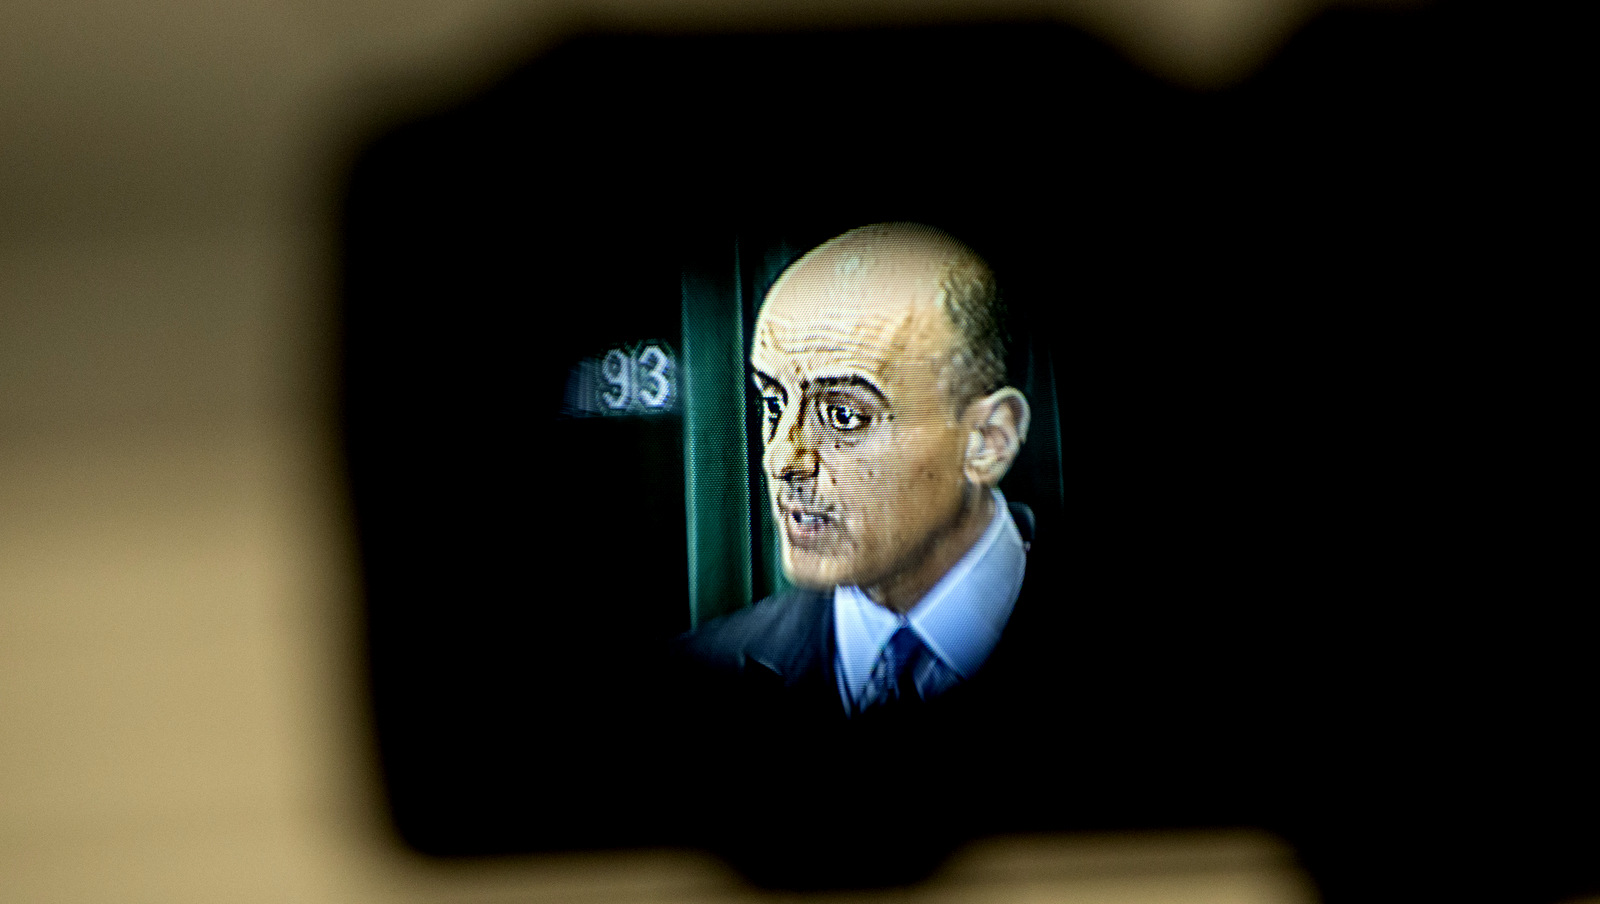 Seen in a video camera viewfinder, Saudi Arabian Ambassador Adel Al-Jubeir speaks about the Saudi military campaign in Yemen during a news conference at the Saudi Embassy in Washington, April 22, 2015. (AP/Jacquelyn Martin)